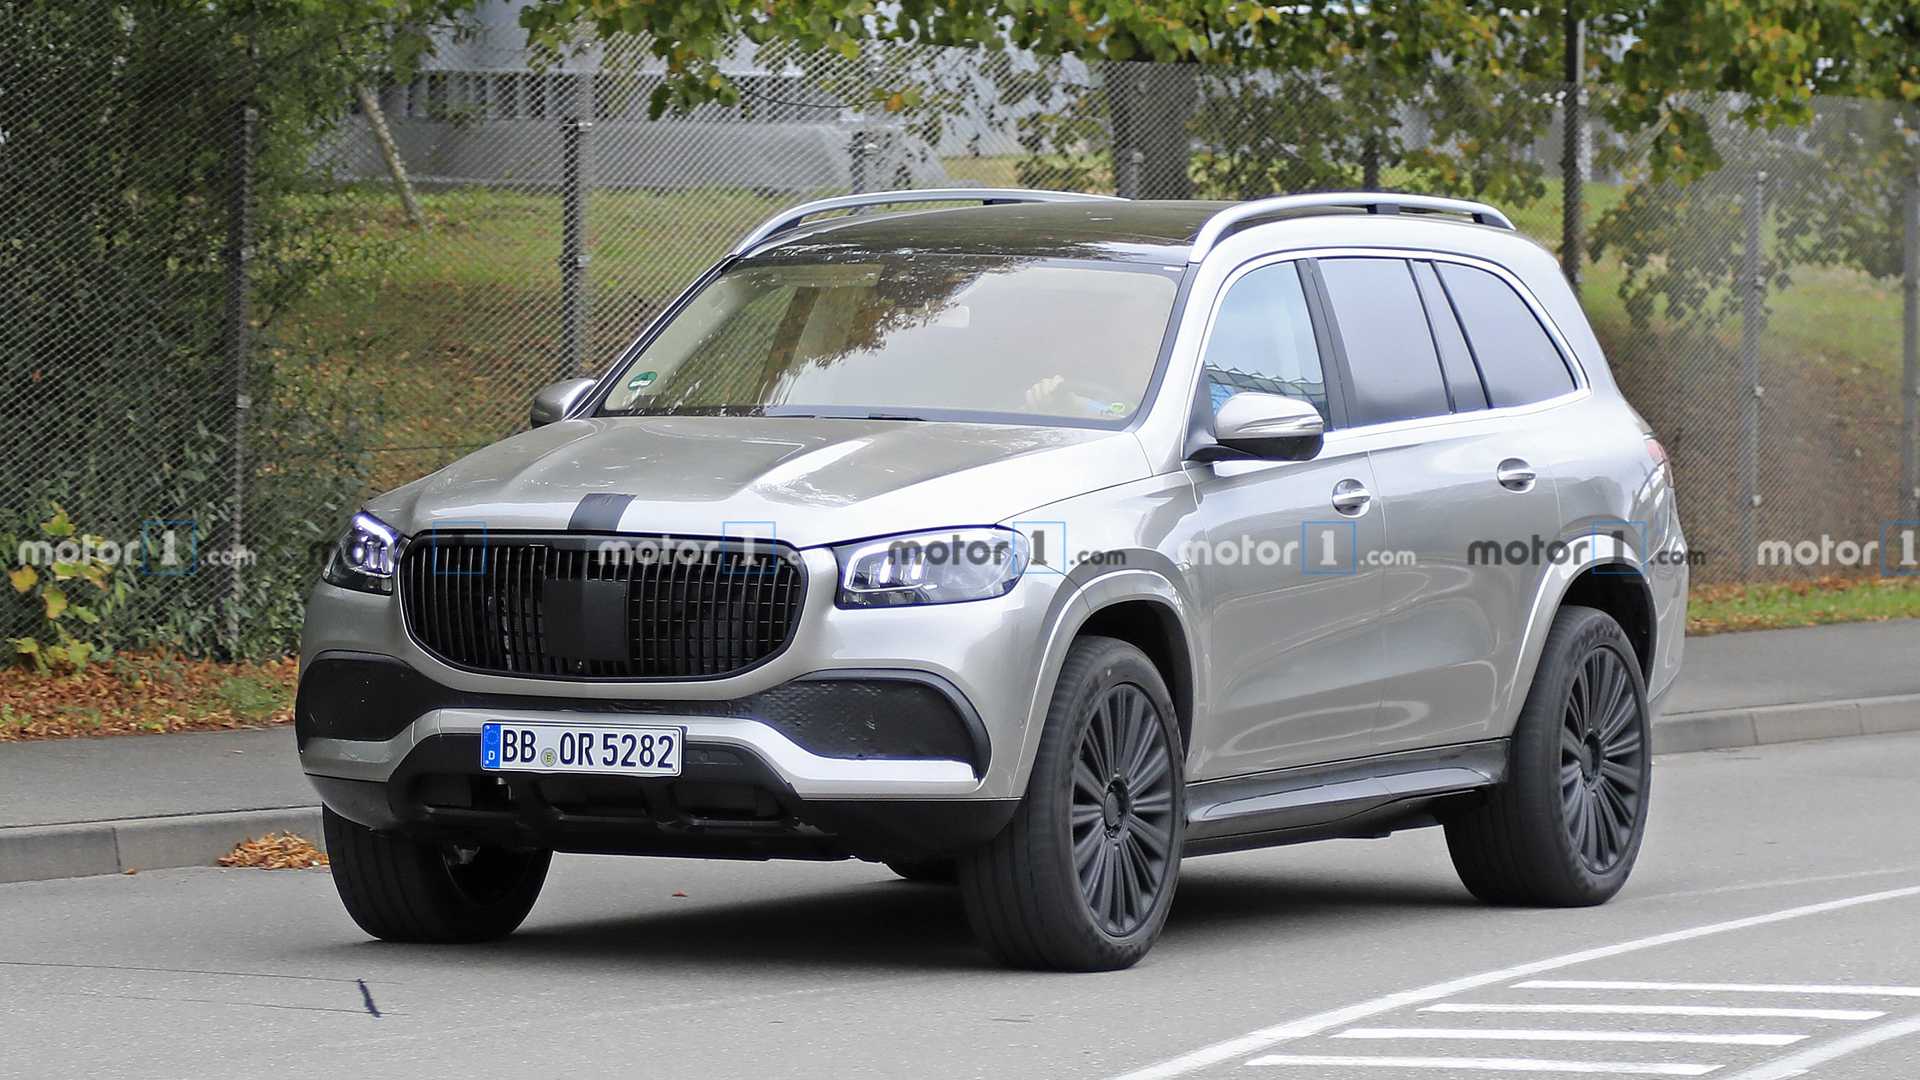 Mercedes Maybach GLS To Be Revealed On November 21